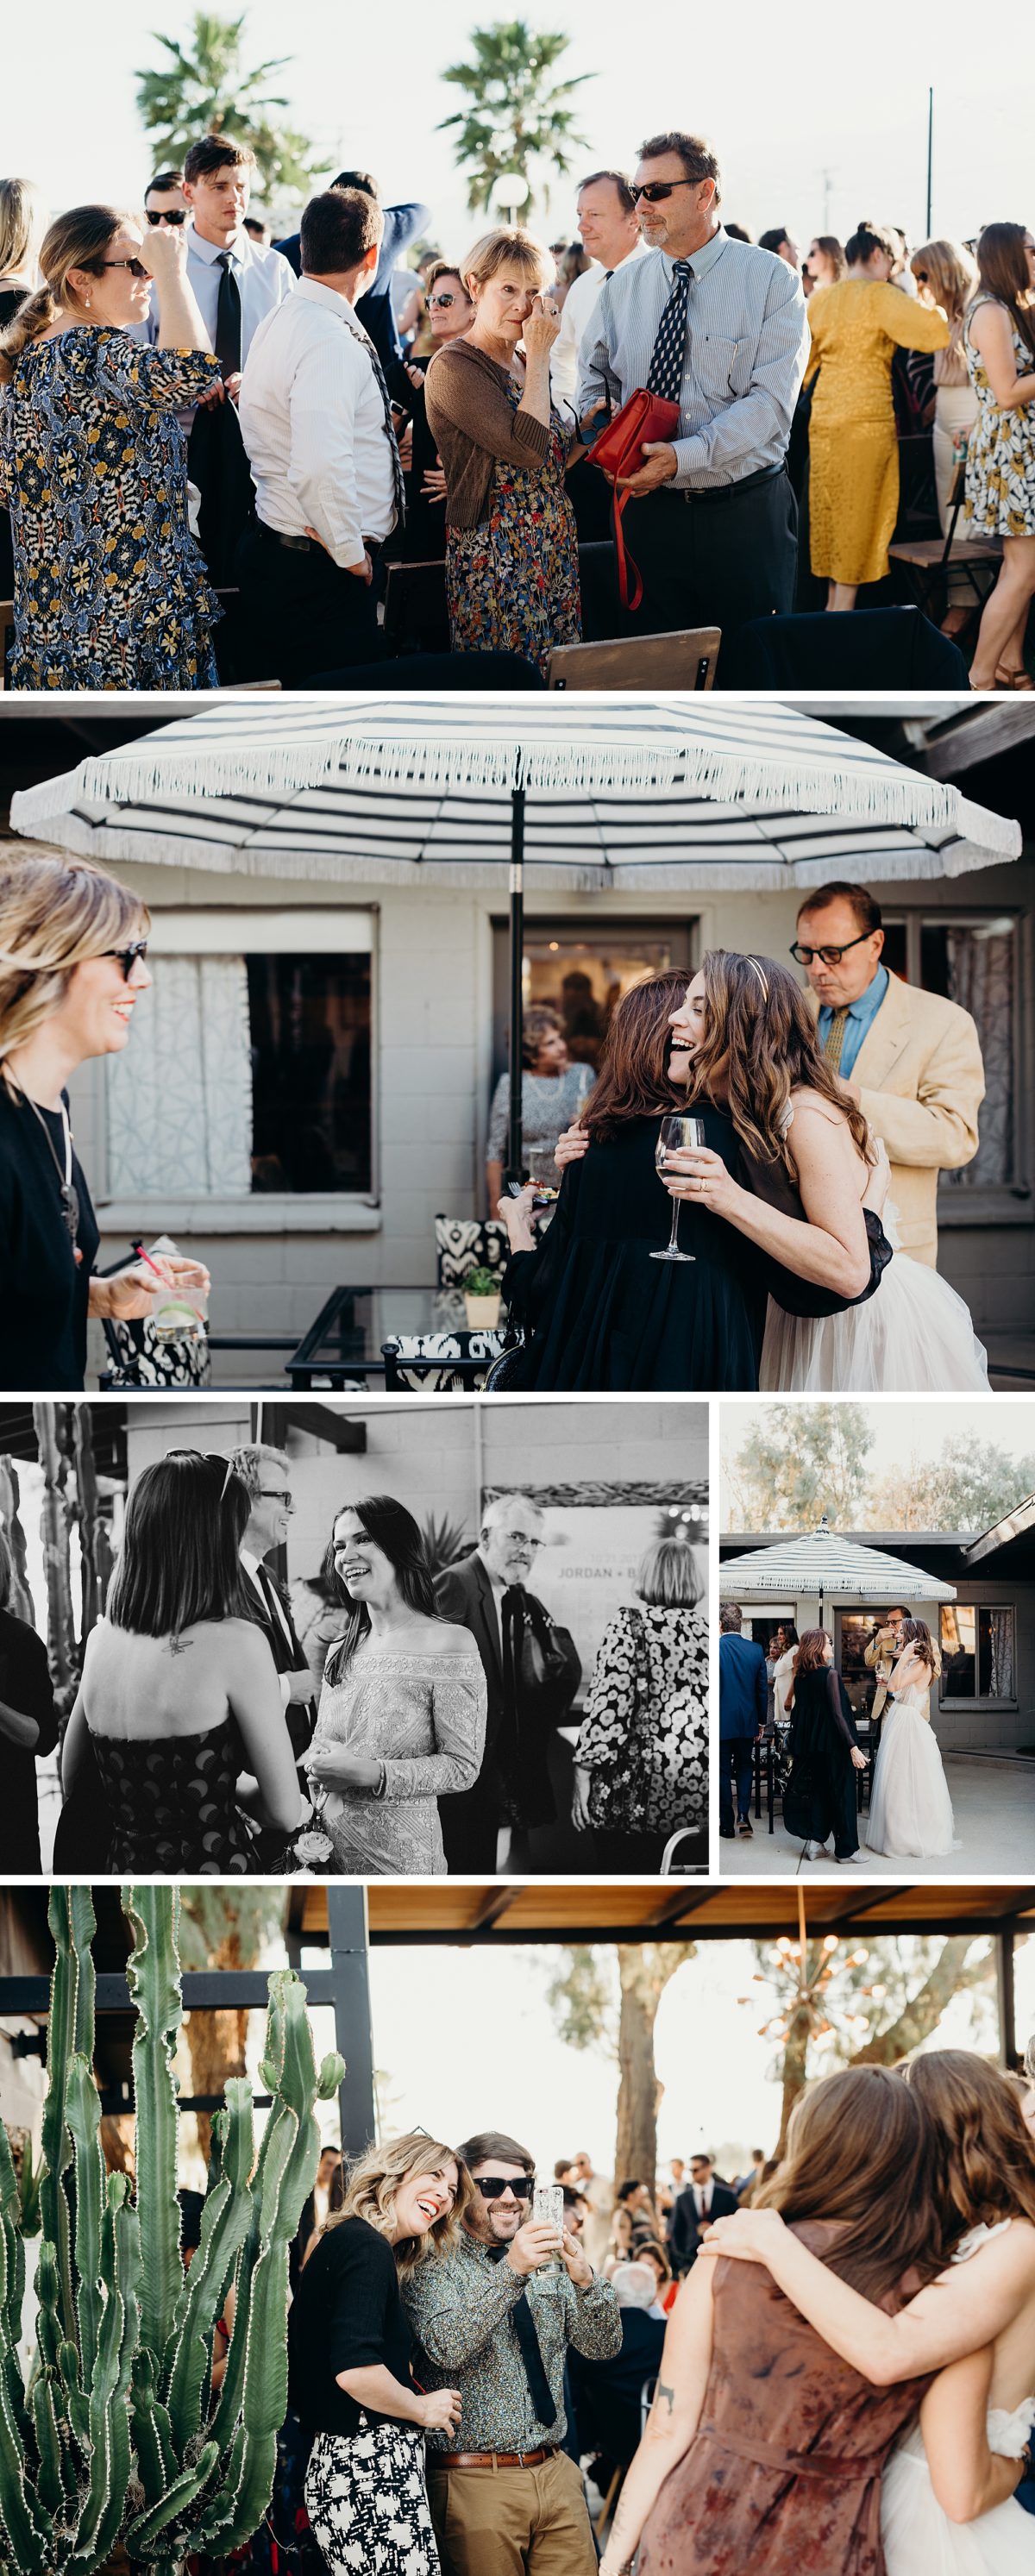 Candid wedding photography in Desert Hot Springs, CA by Briana Morrison